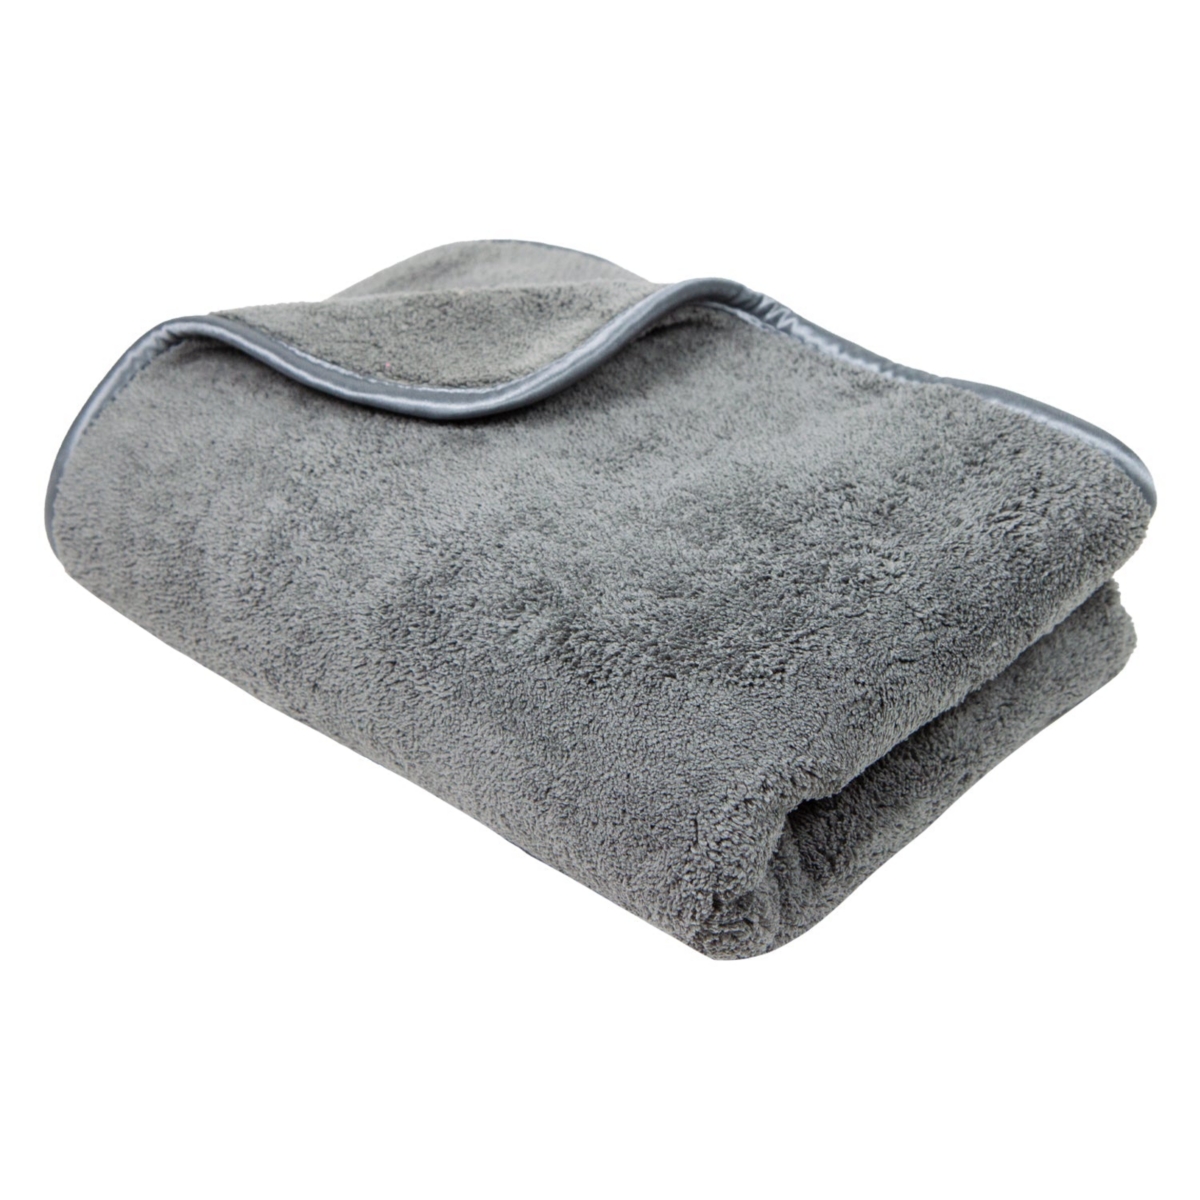 Arkwright Towelzilla Car Washing Towel - 25x36, Ultra Thick and Absorbent 800 Gsm - Grey